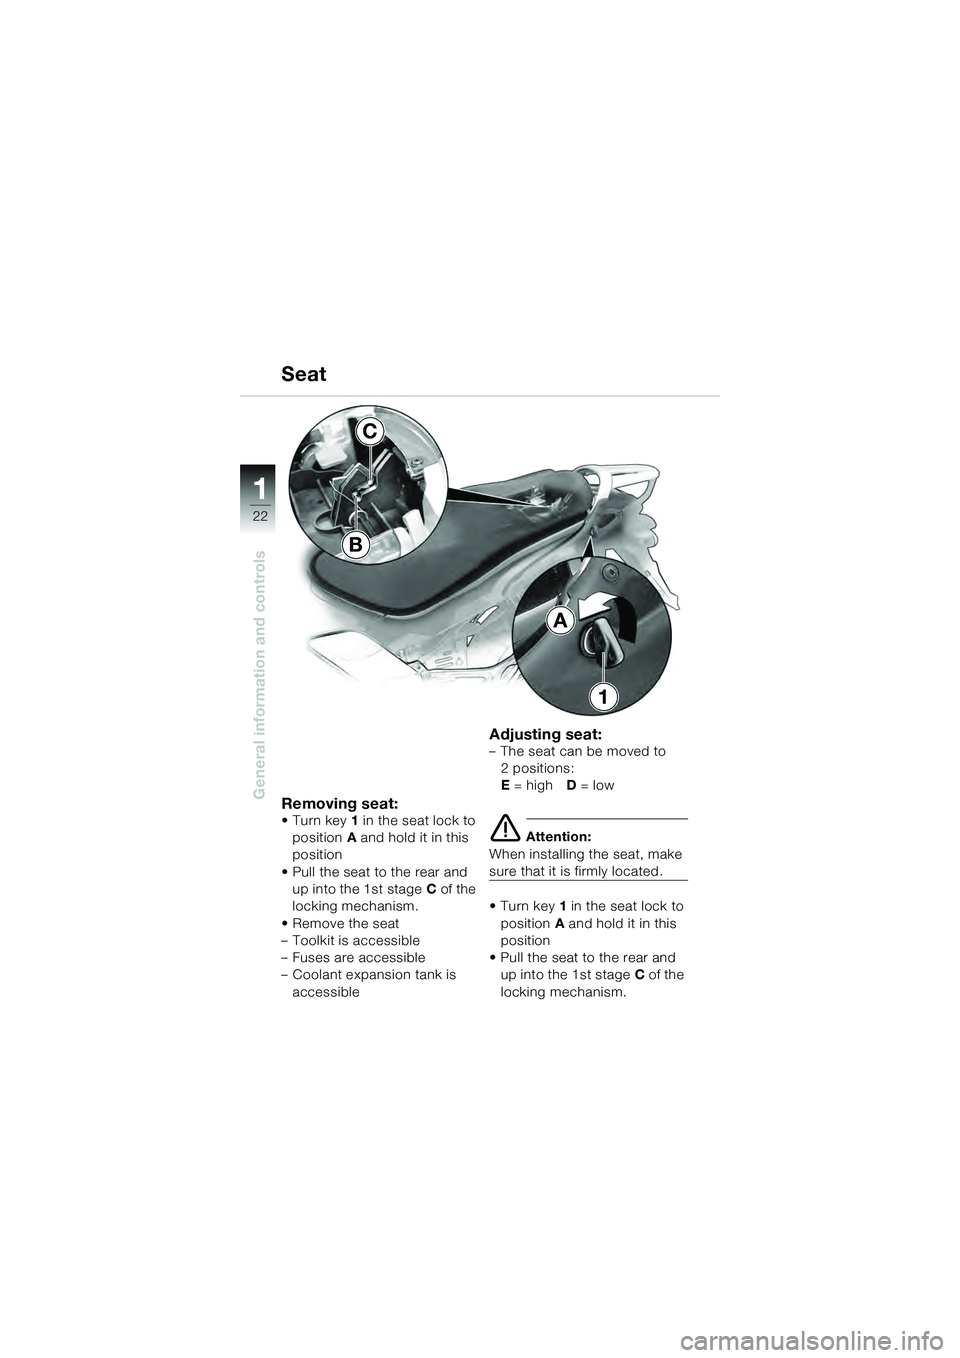 BMW MOTORRAD K 1200 GT 2004  Riders Manual (in English) 22
General information and controls
1
Removing seat:• Turn key1 in the seat lock to 
position A and hold it in this 
position
• Pull the seat to the rear and  up into the 1st stage C of the 
locki